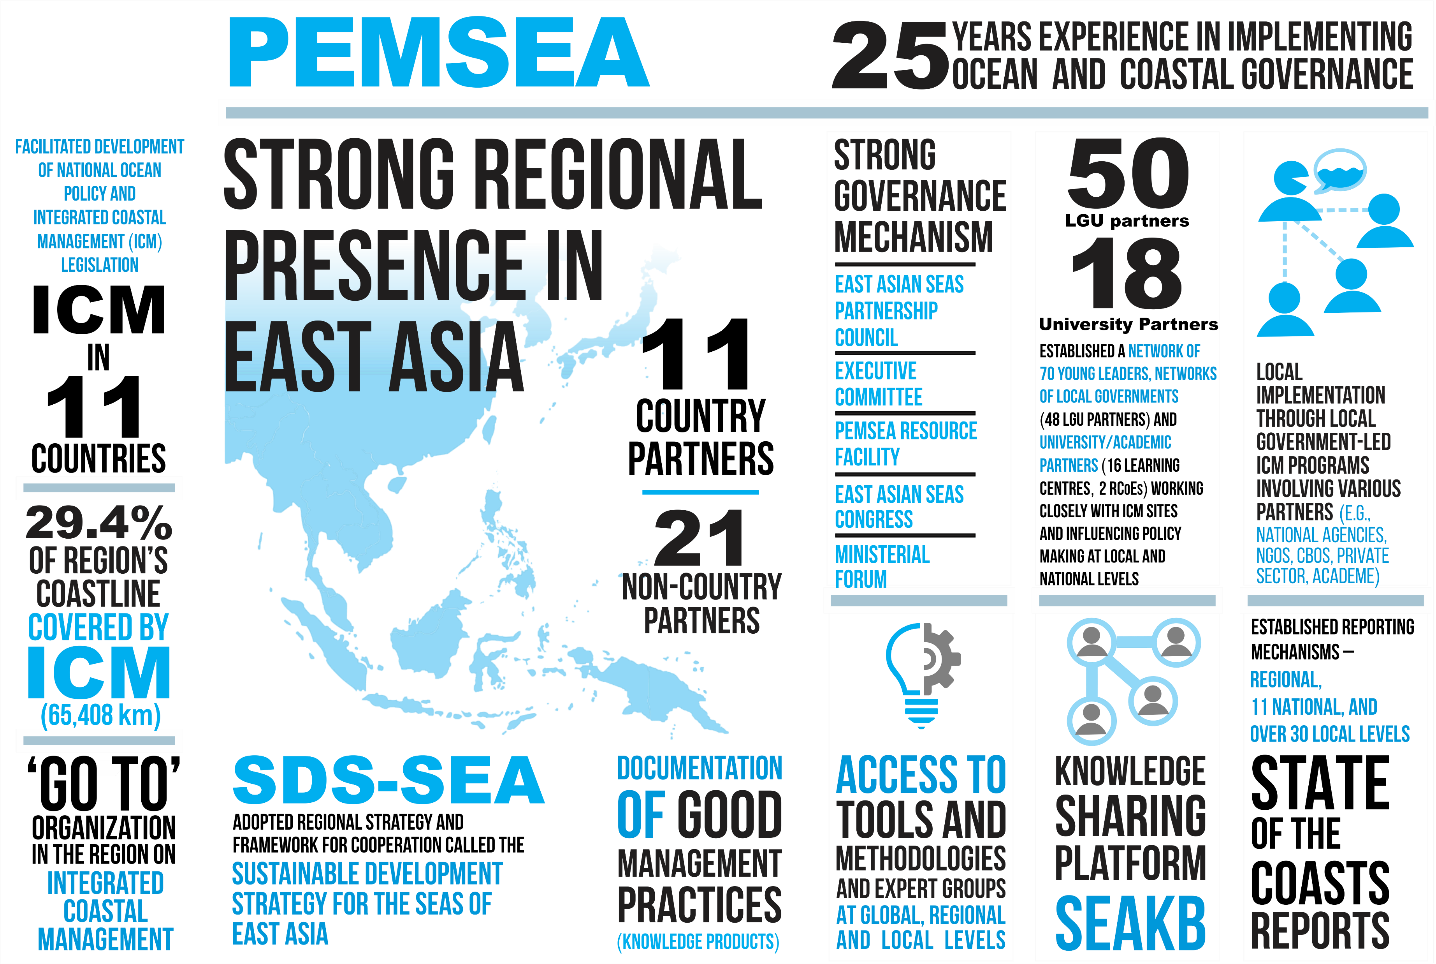 Infographic PEMSEA - 25 Years Experience in Implementing Ocean and Coastal Governance